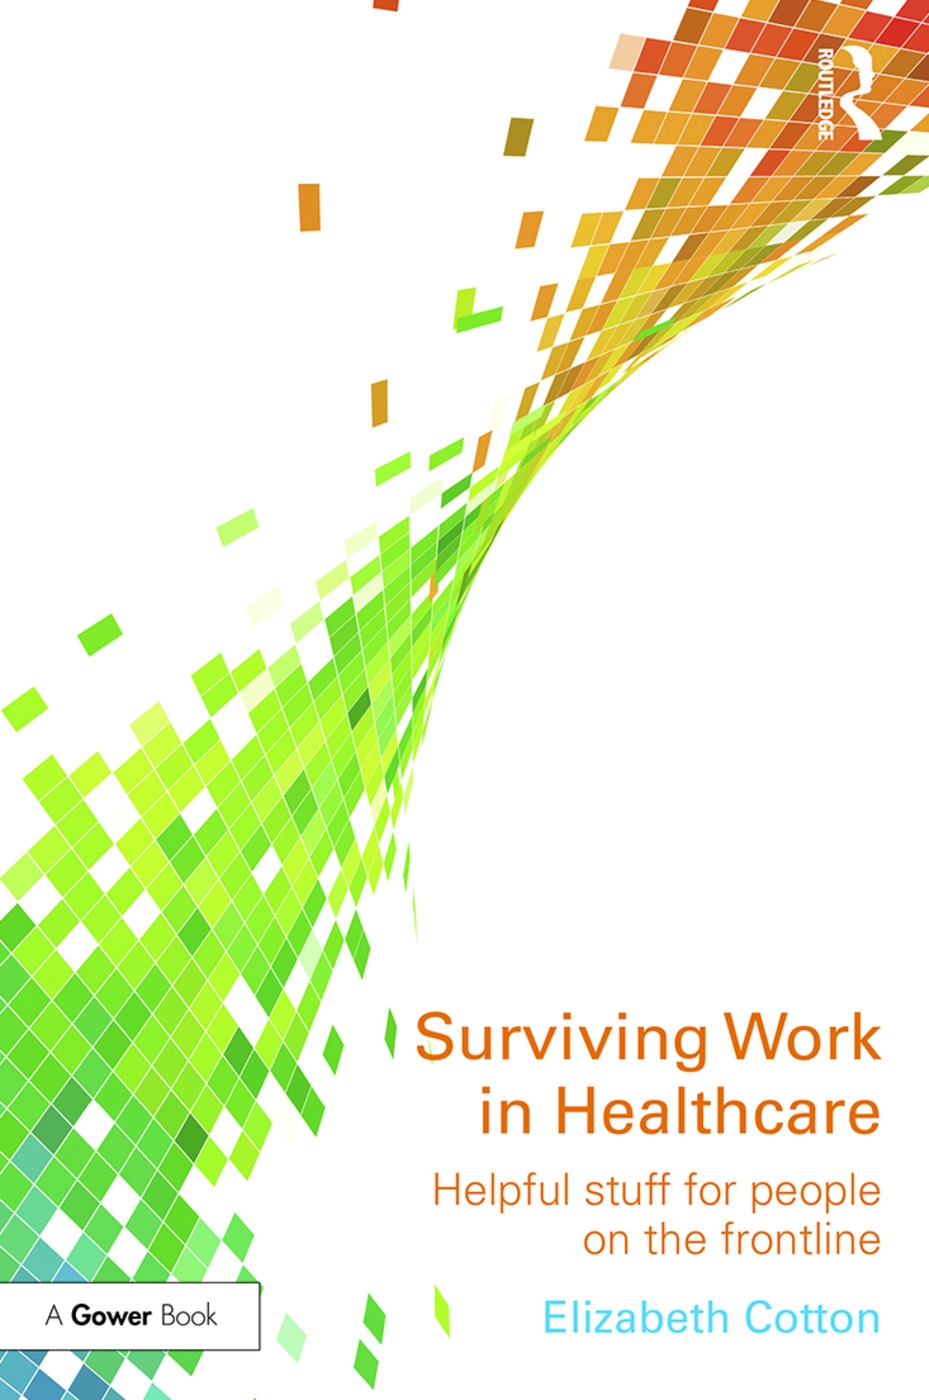 Surviving Work in Healthcare: Helpful Stuff for People on the Frontline